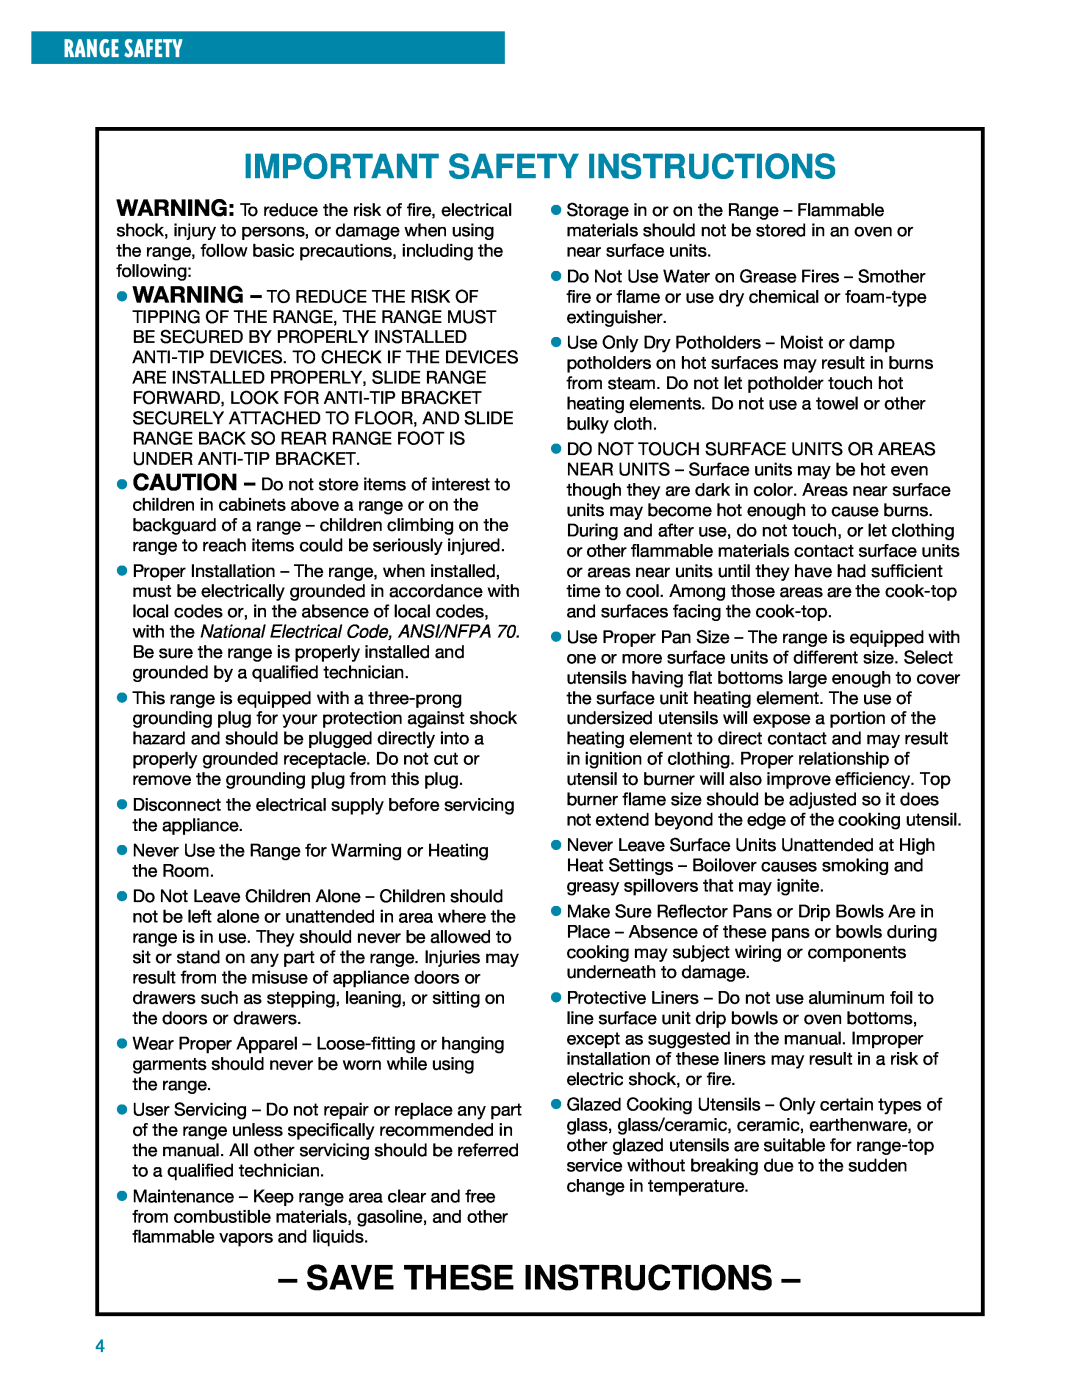 Whirlpool SF395LEE manual Important Safety Instructions, Save These Instructions, Range Safety 